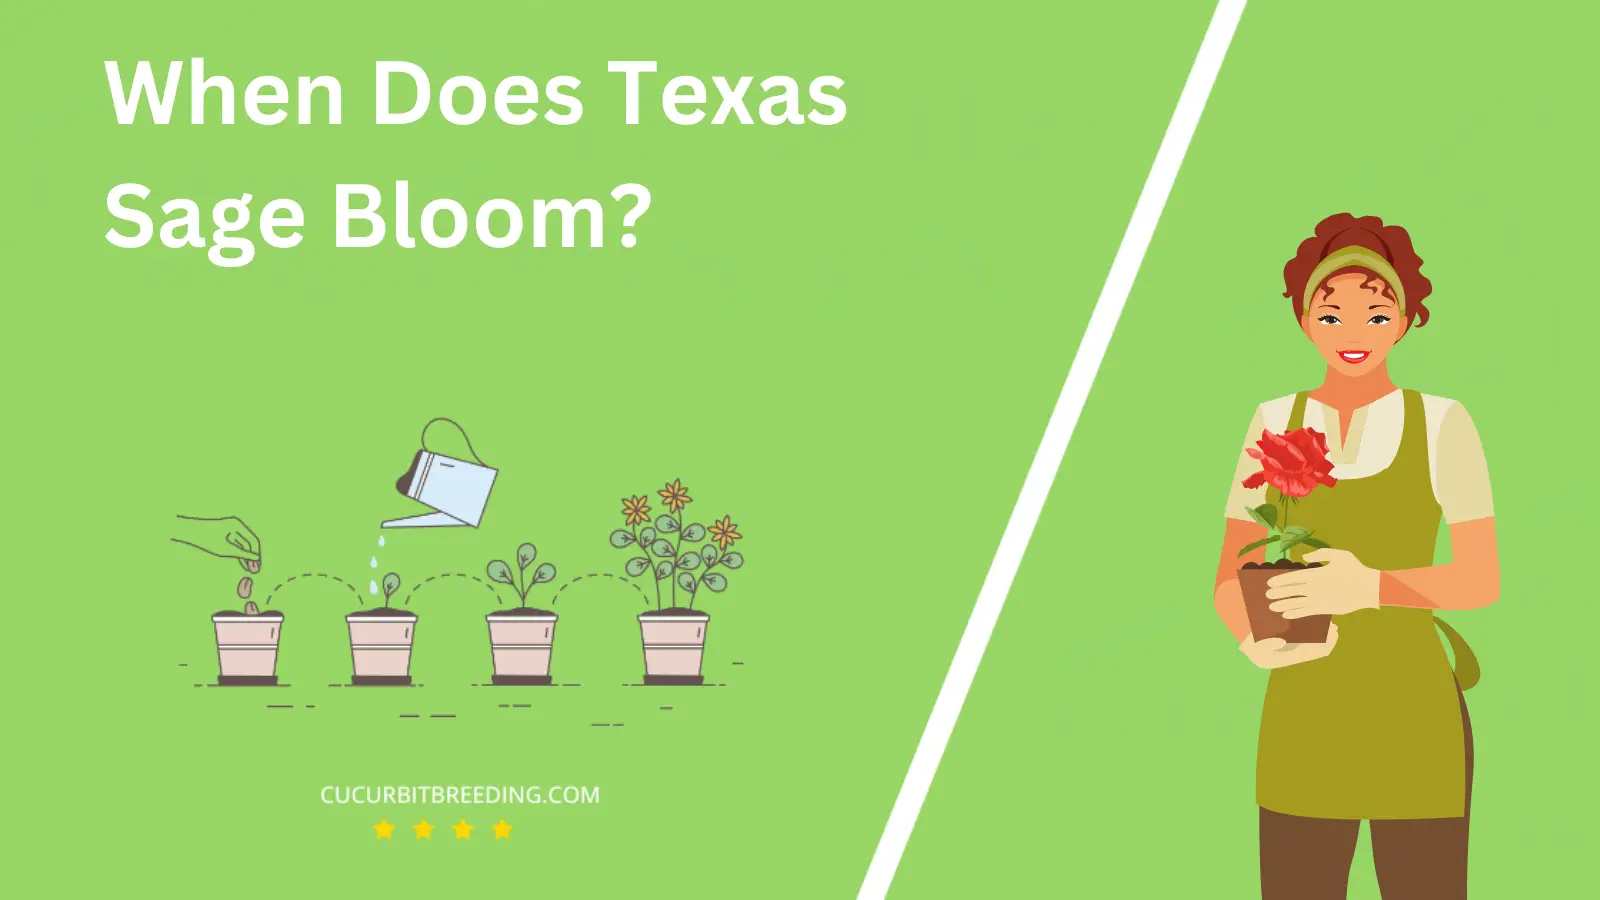 When Does Texas Sage Bloom?